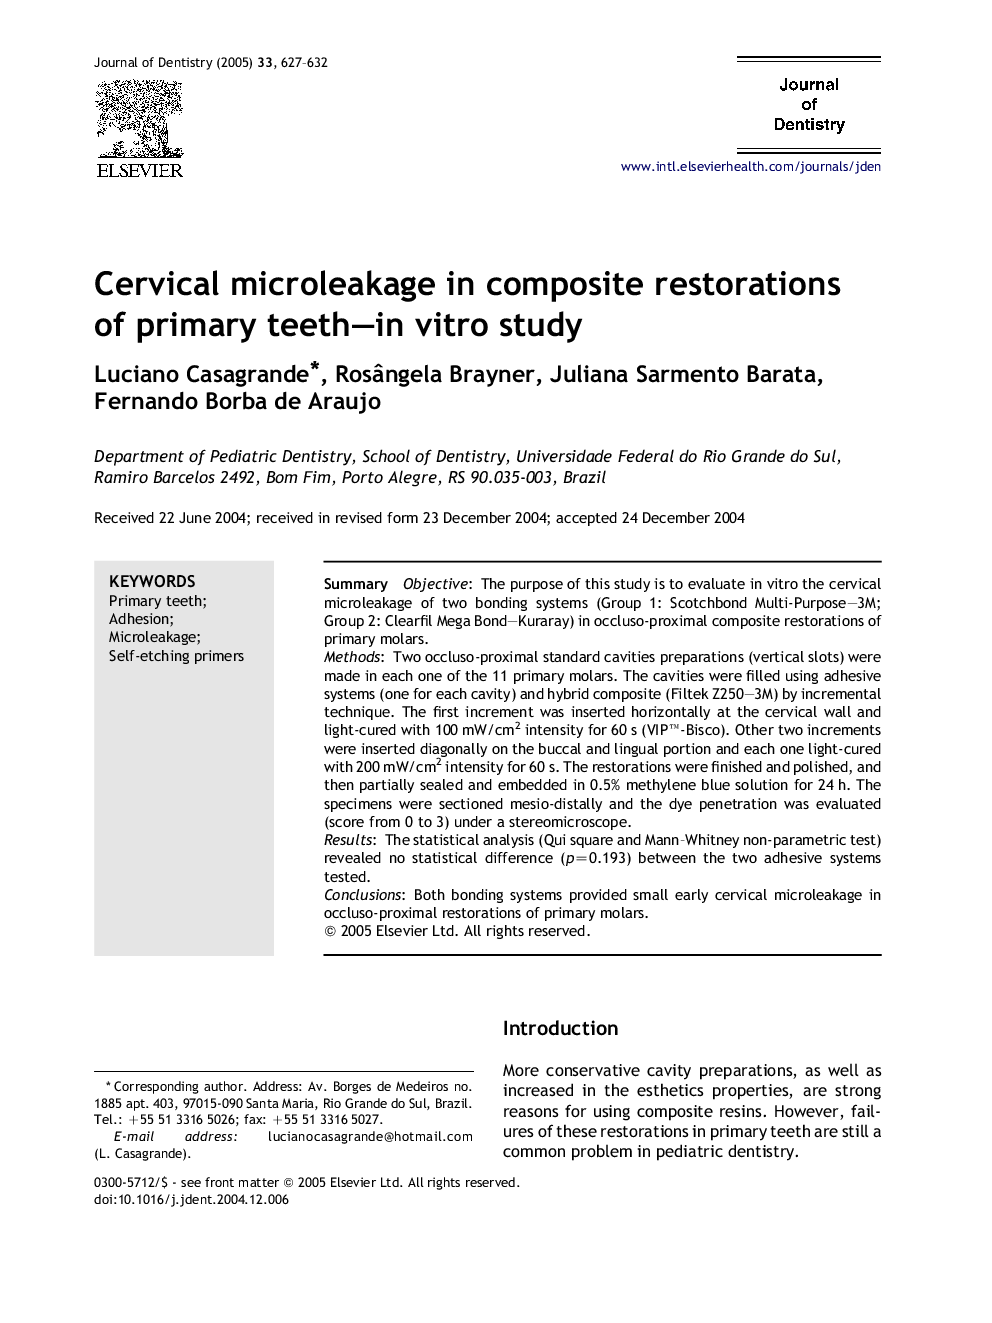 Cervical microleakage in composite restorations of primary teeth-in vitro study